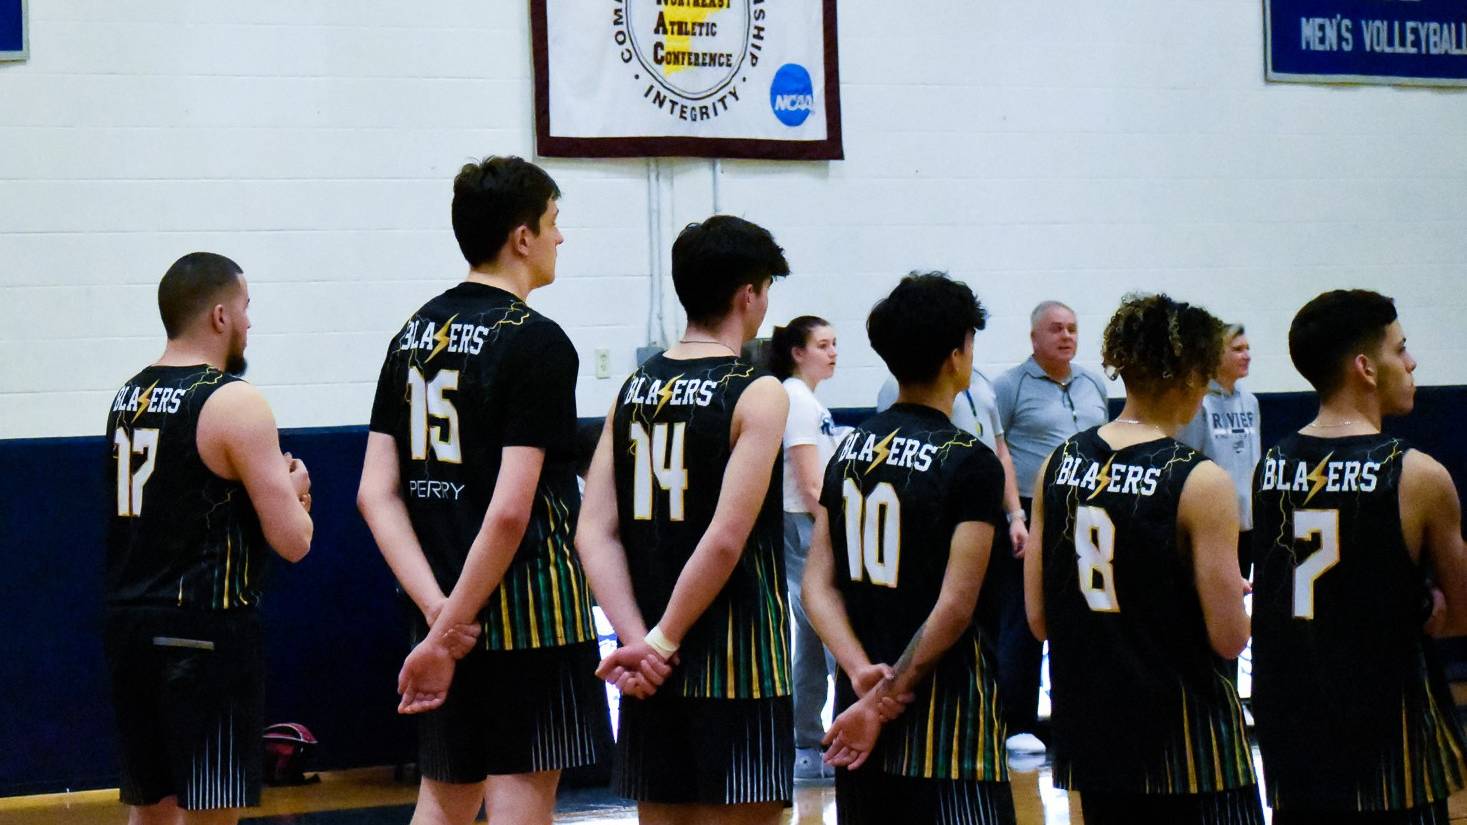 After an Extended Second Set, Men's Volleyball Loses to Eastern Nazarene